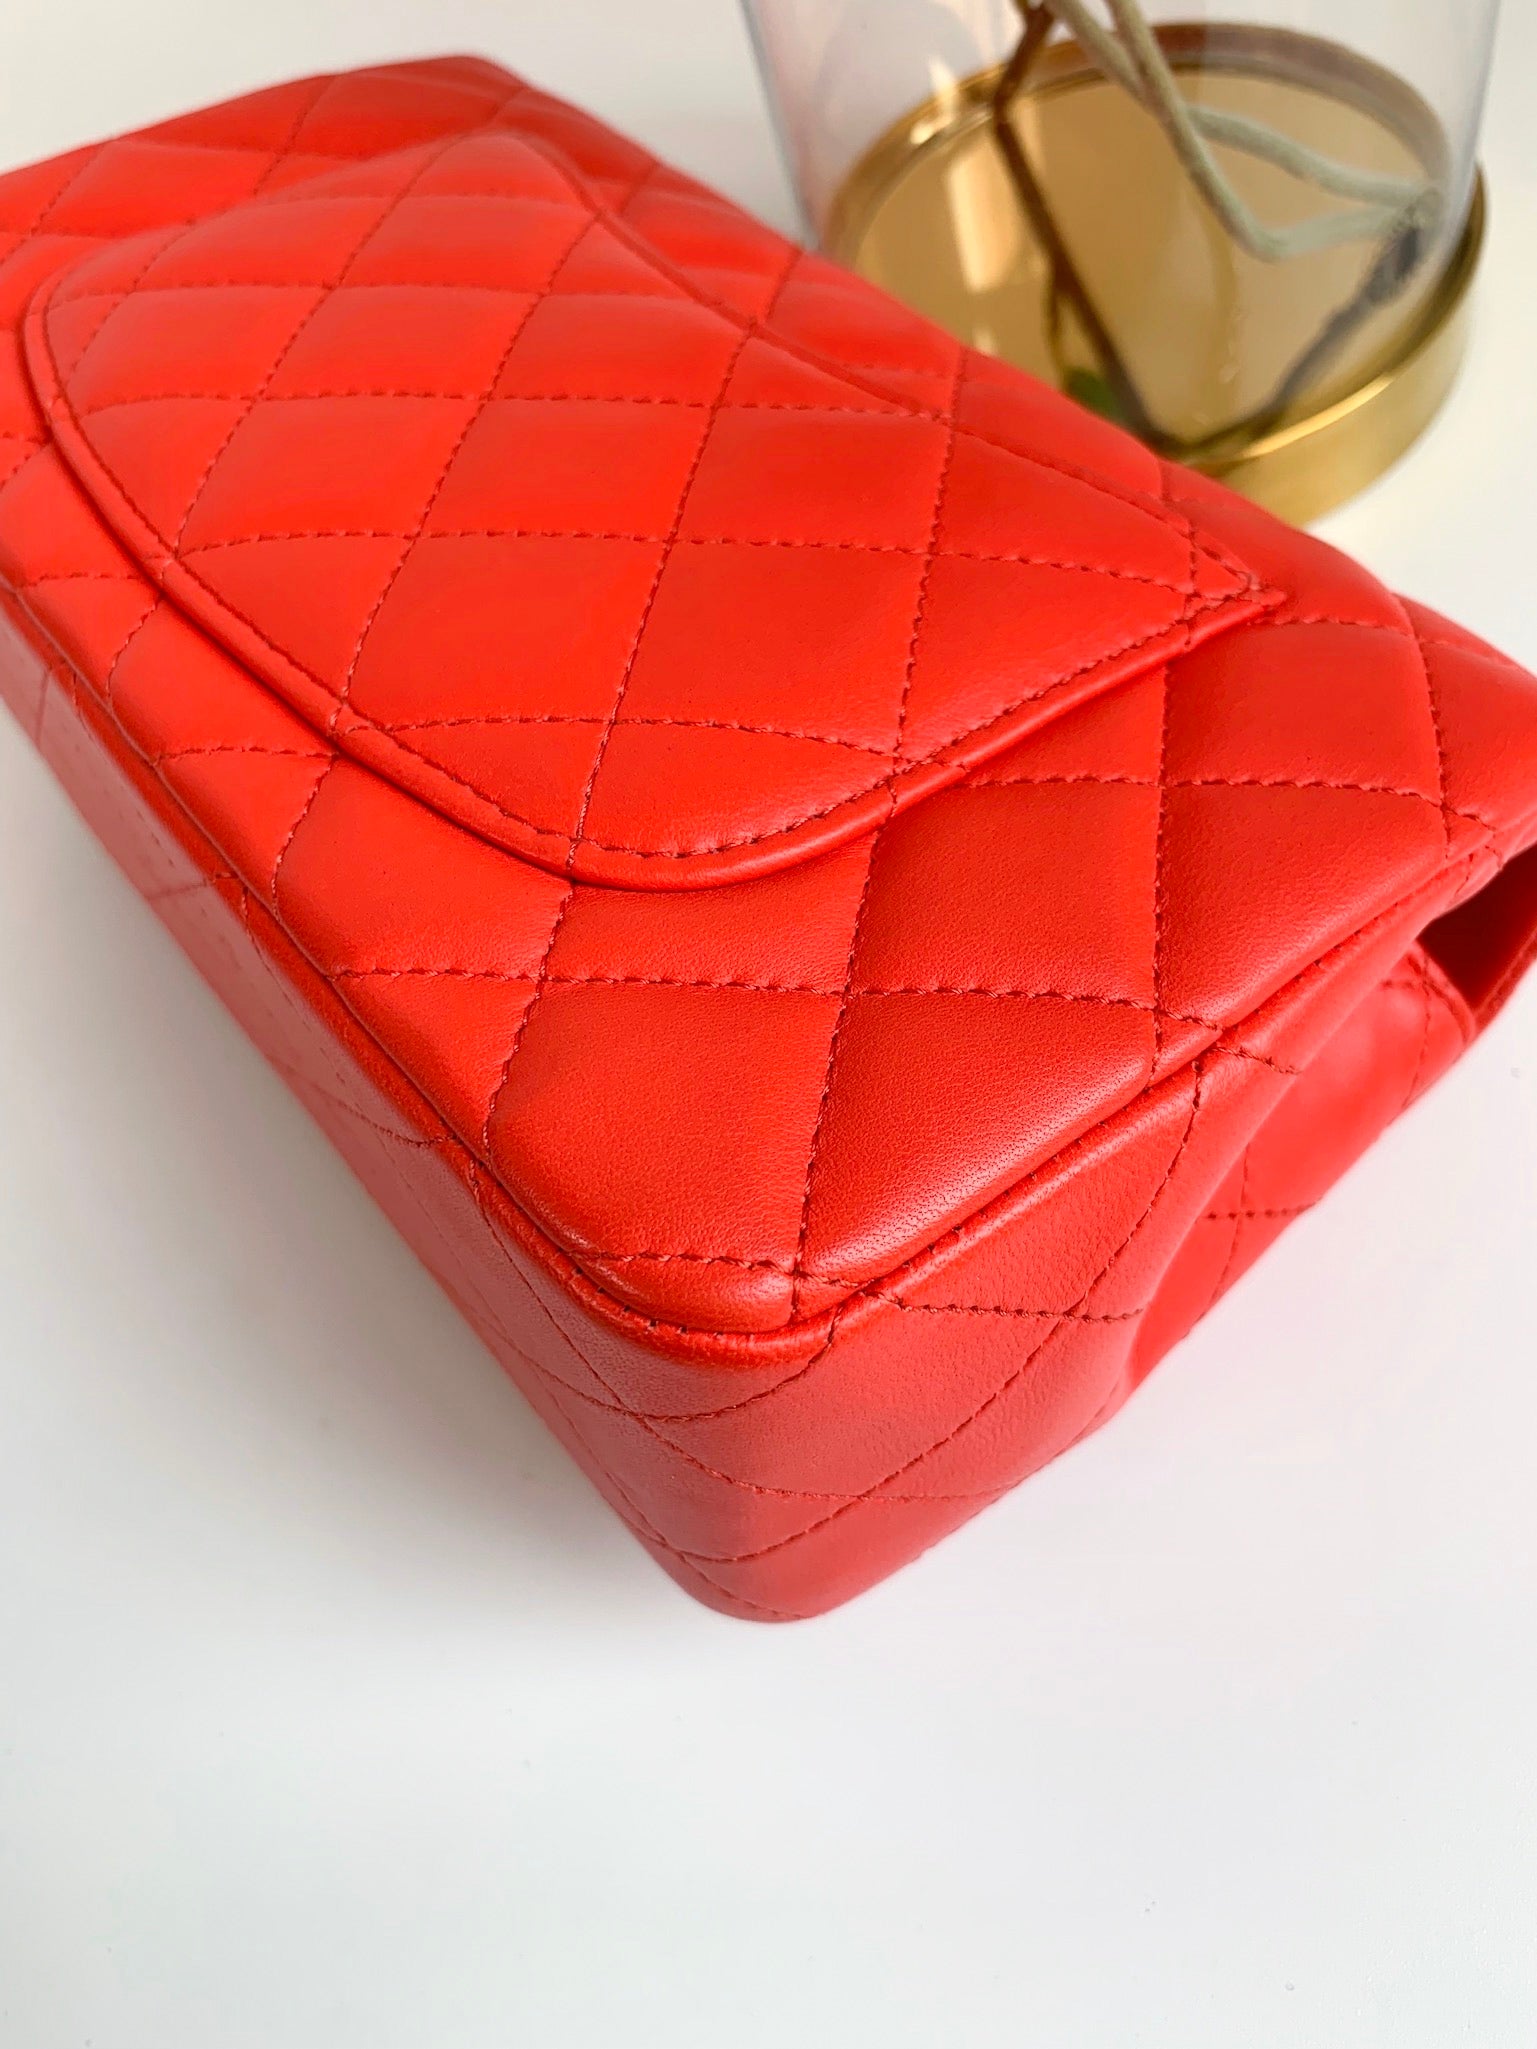 Chanel Red Quilted Lambskin Double Mini Classic Flap, Silver Hardware, 2011 (Like New), Womens Handbag